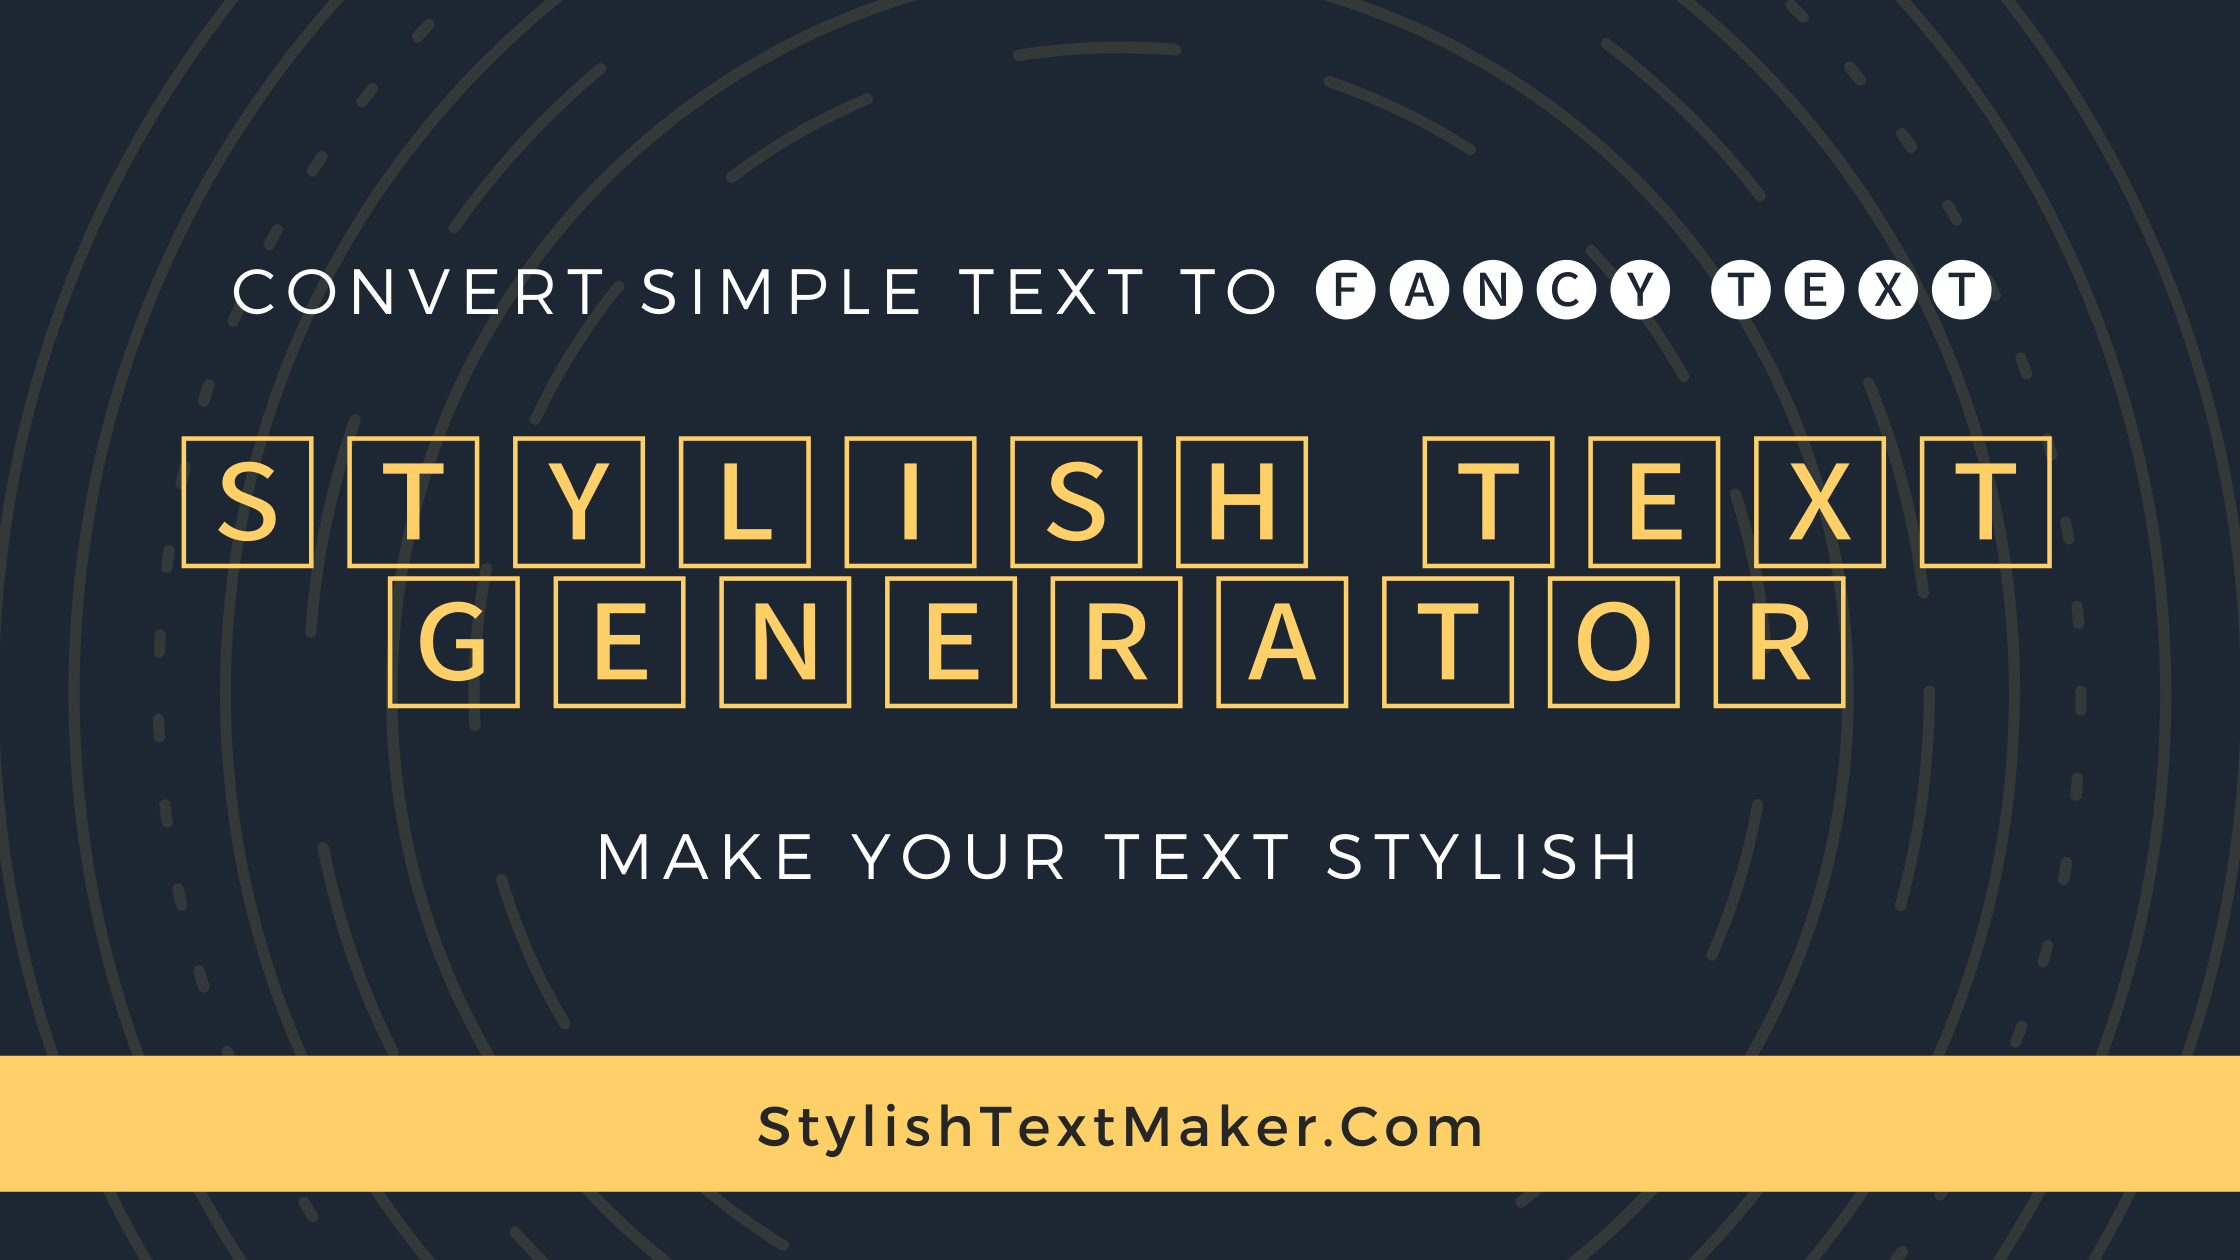 Sociable Peace of mind engagement Stylish Text Generator - ℂ𝕠𝕠𝕝 & 𝓕𝓪𝓷𝓬𝔂 Text Fonts